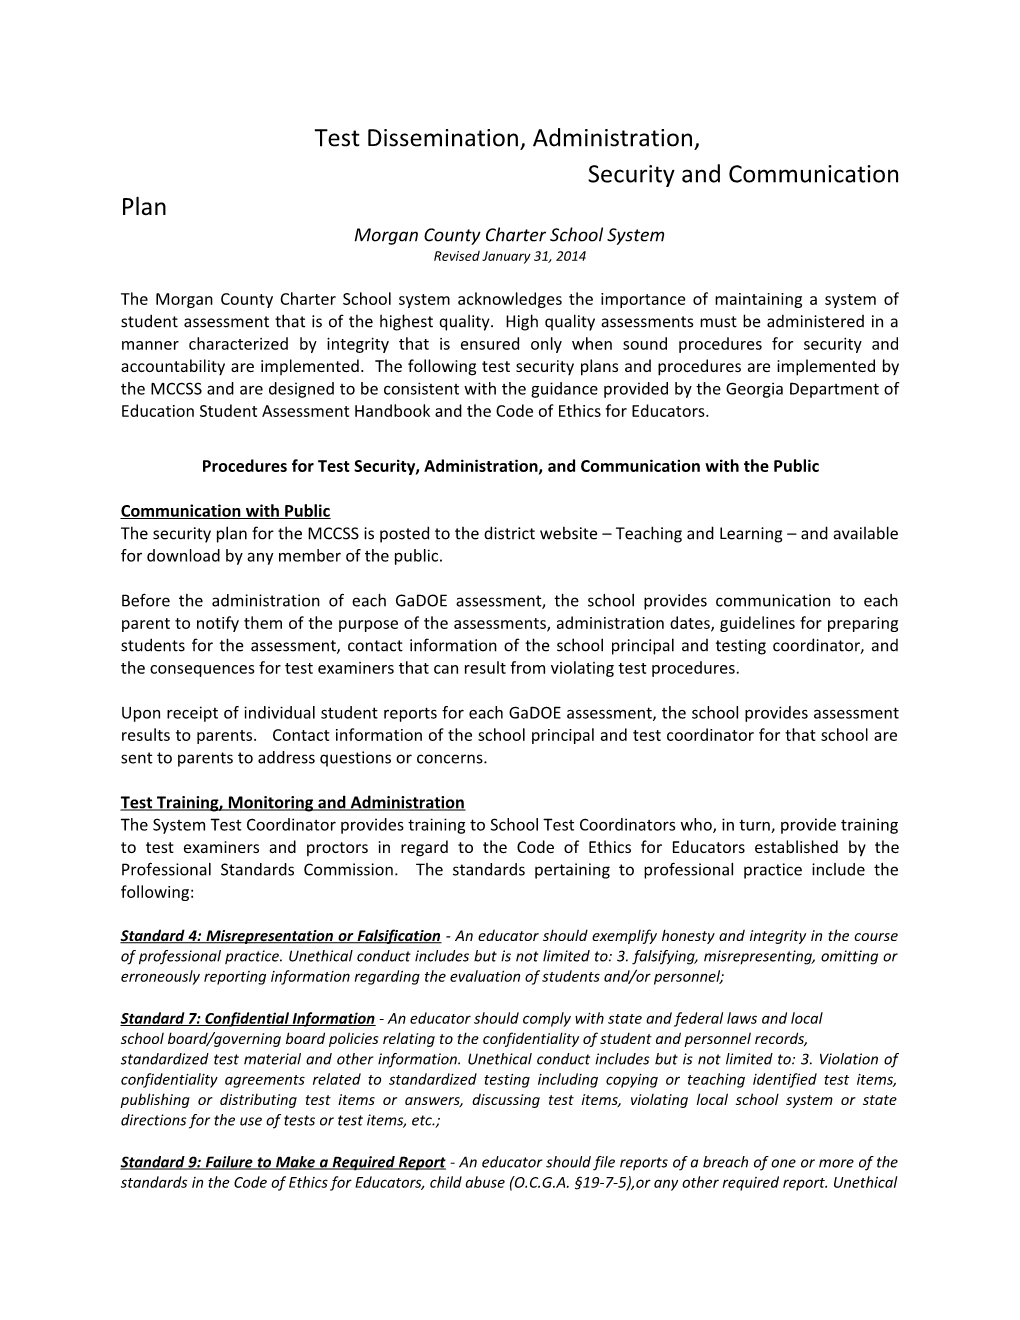 Security and Communication Plan